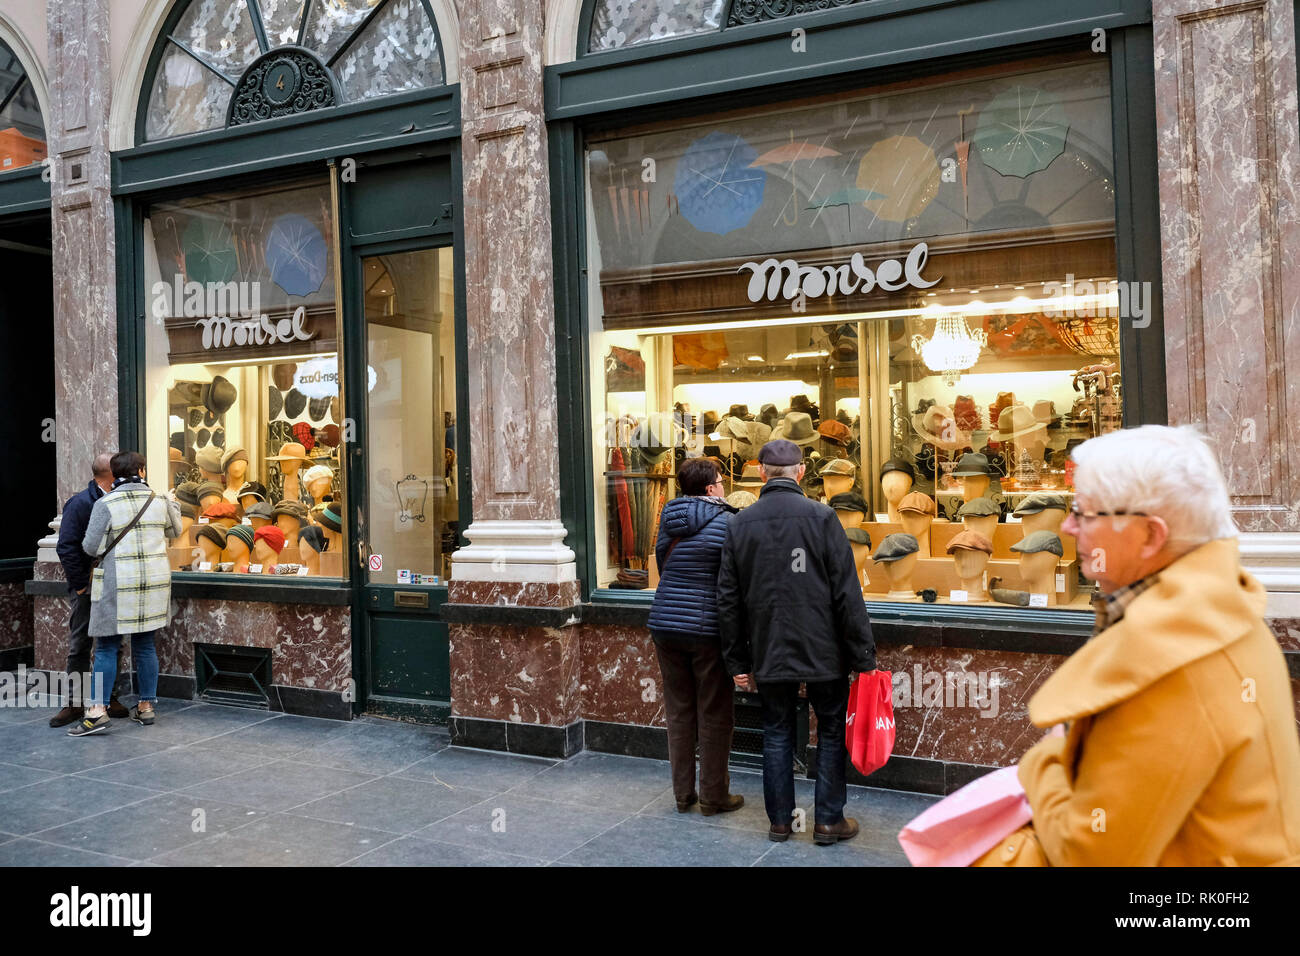 Brussels, Belgium - Hut shop Monsel and passers-by in the shopping Galeries Royales Saint-Hubert in Brussels, Bruessel, - Hutge Stock Photo - Alamy